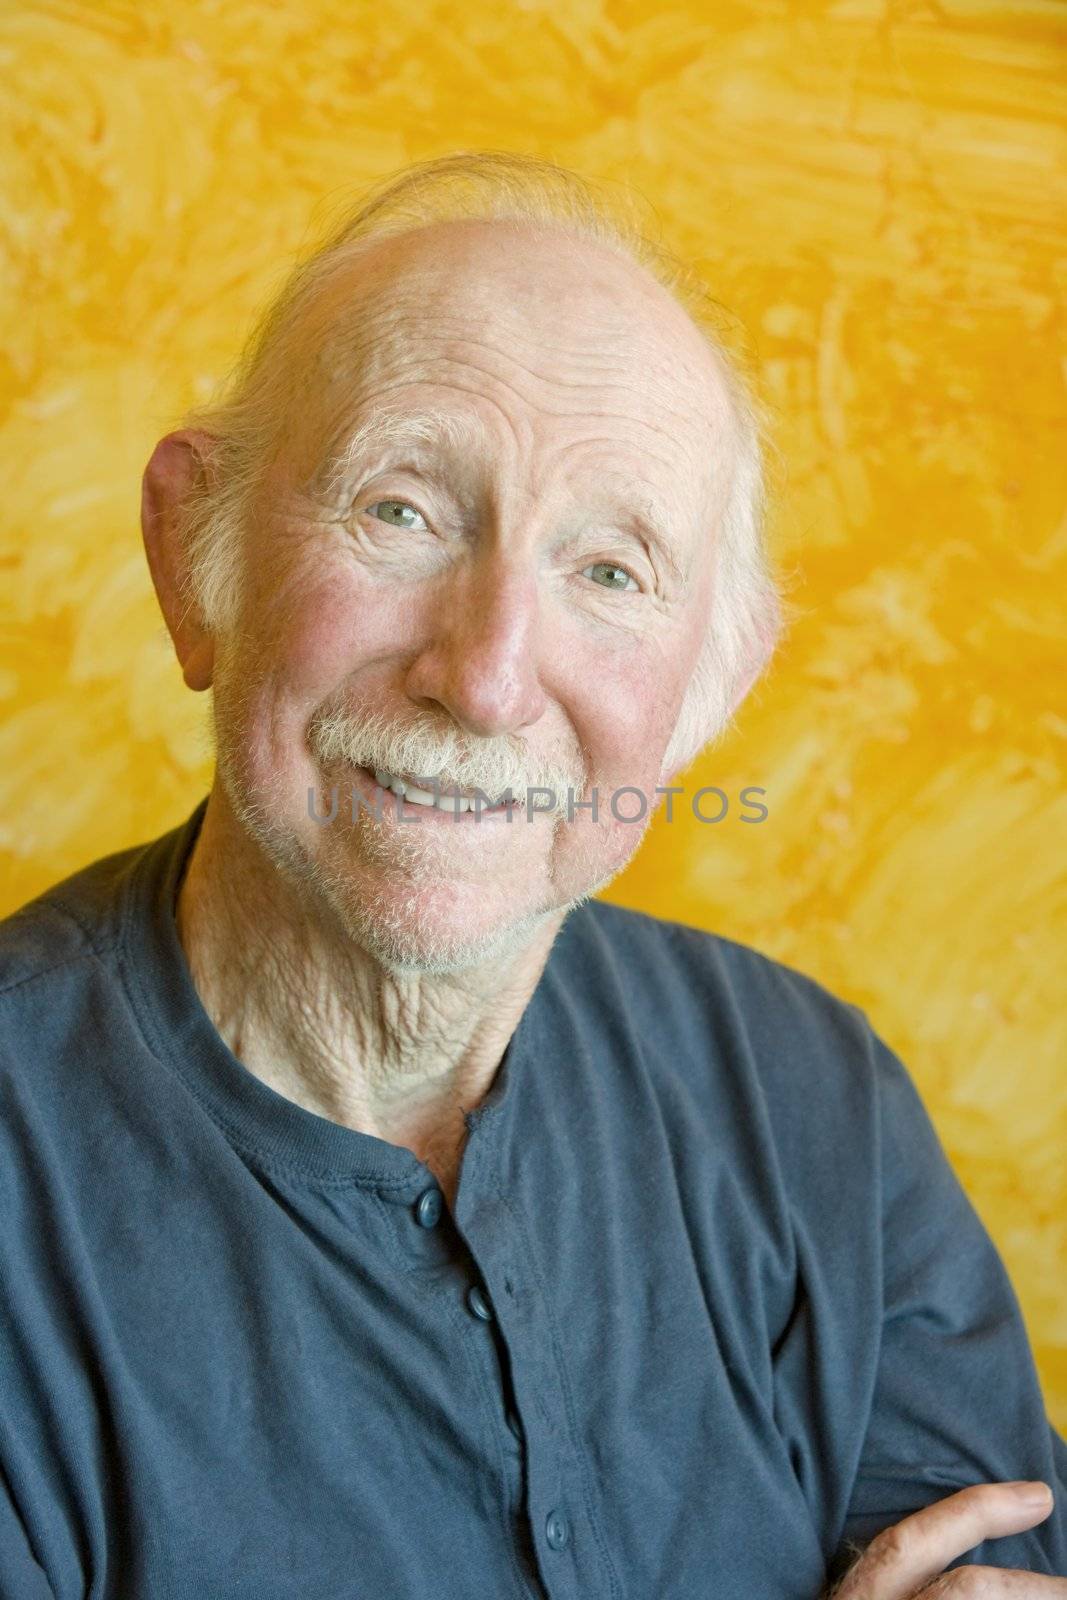 Portrait of an elderly man against a yellow background